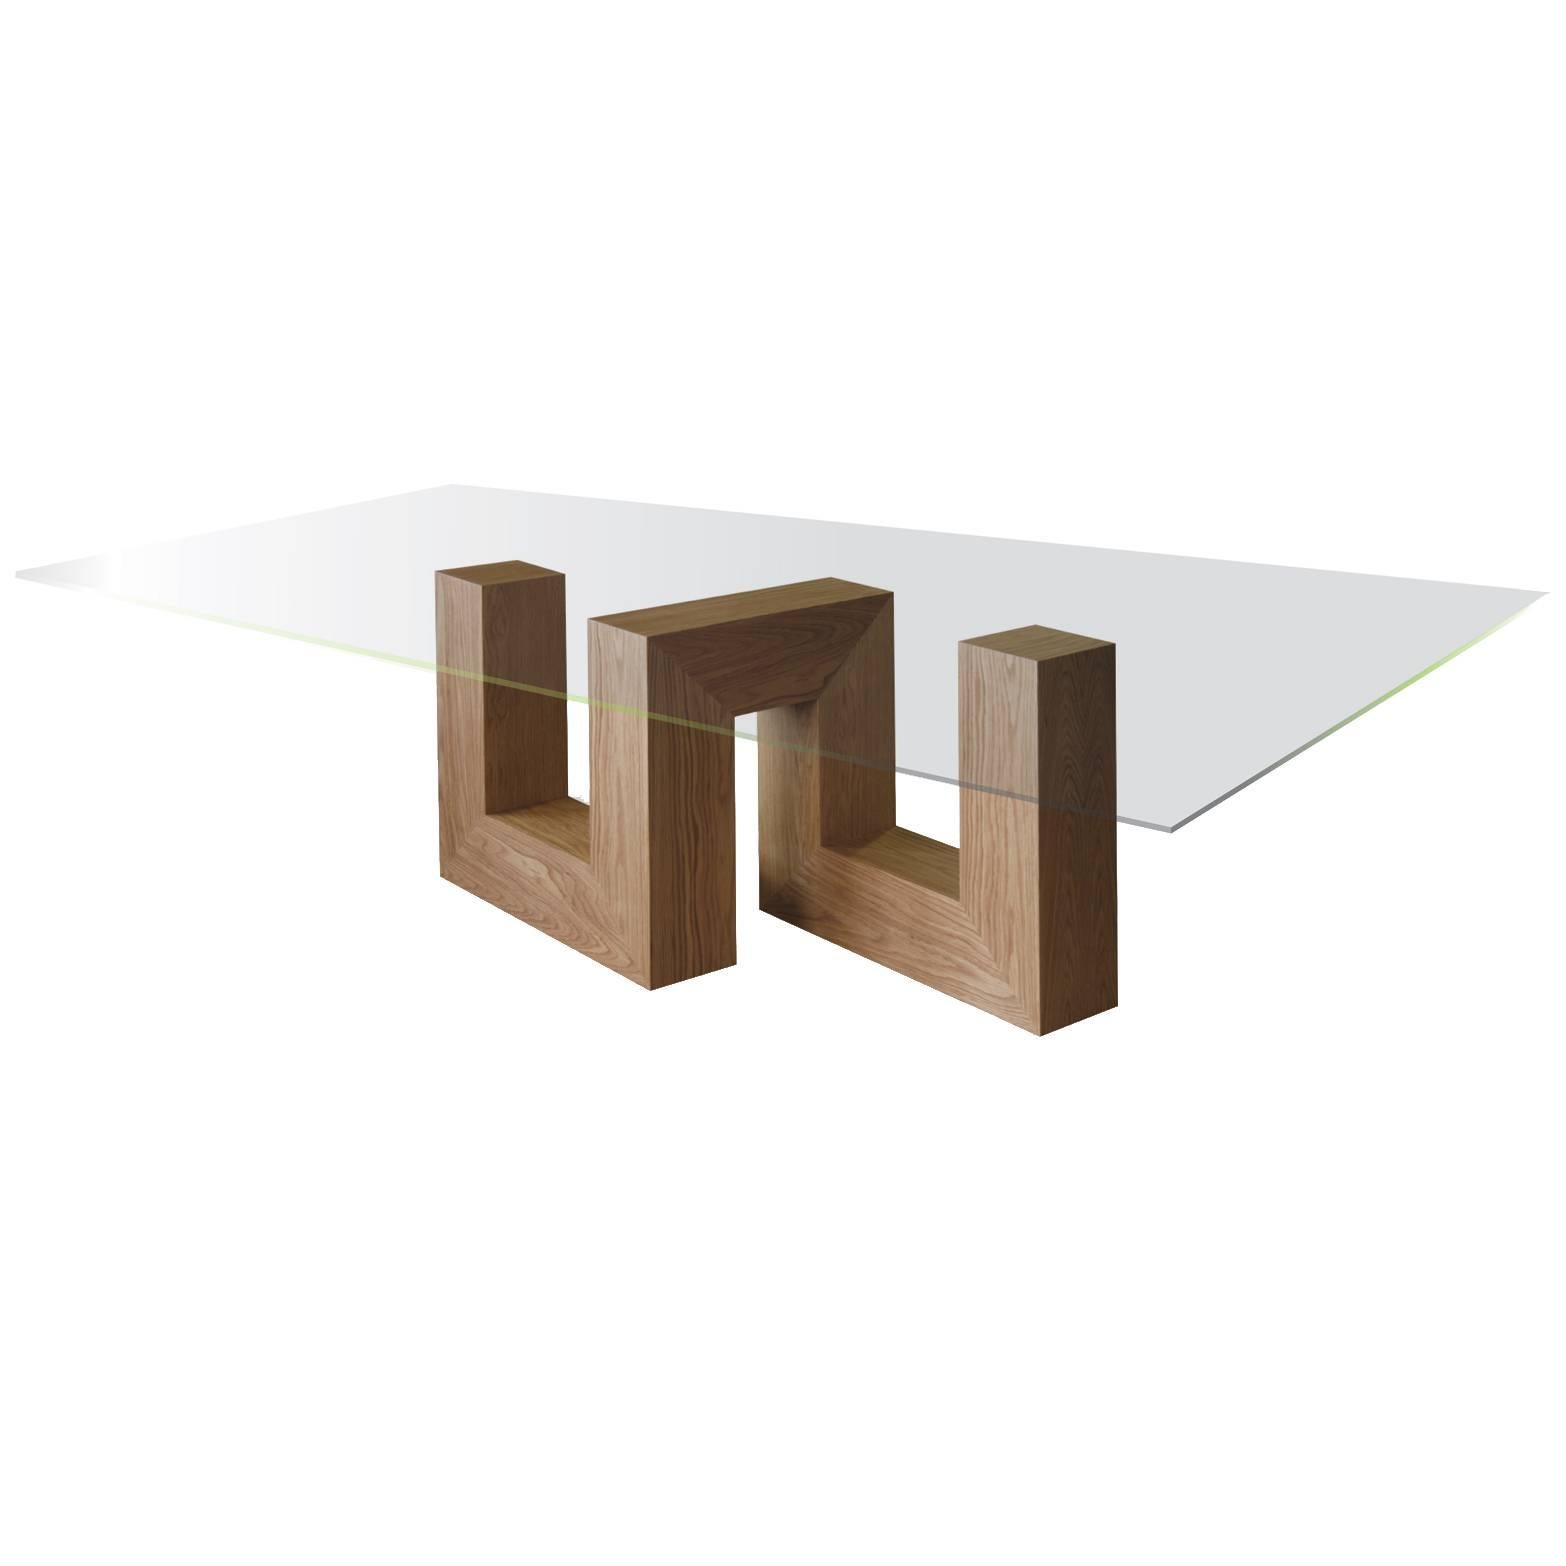 Modern, 21st Century Sculptural Table in American Oak With Glass Top - "Klotz" For Sale